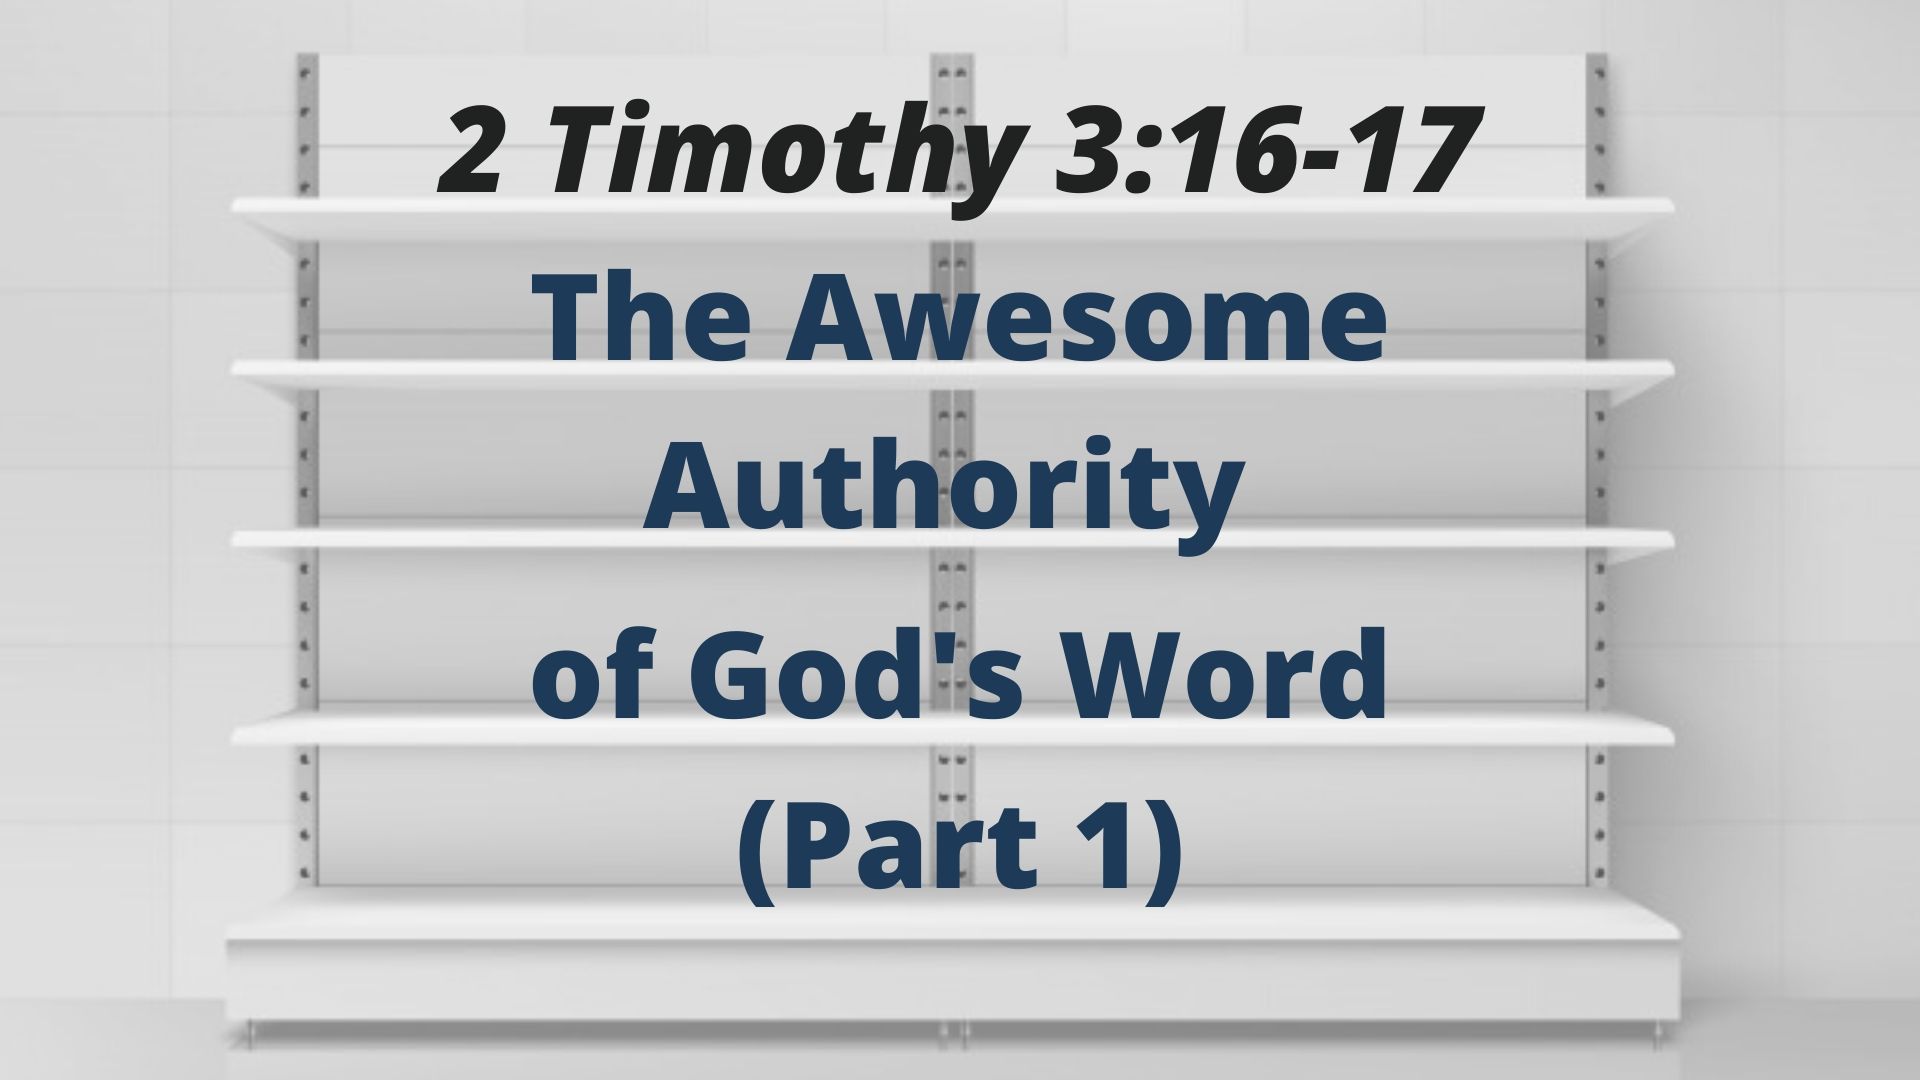 The Awesome Authority of God's Word [Part 1] (2 Timothy 3:16-17) Image